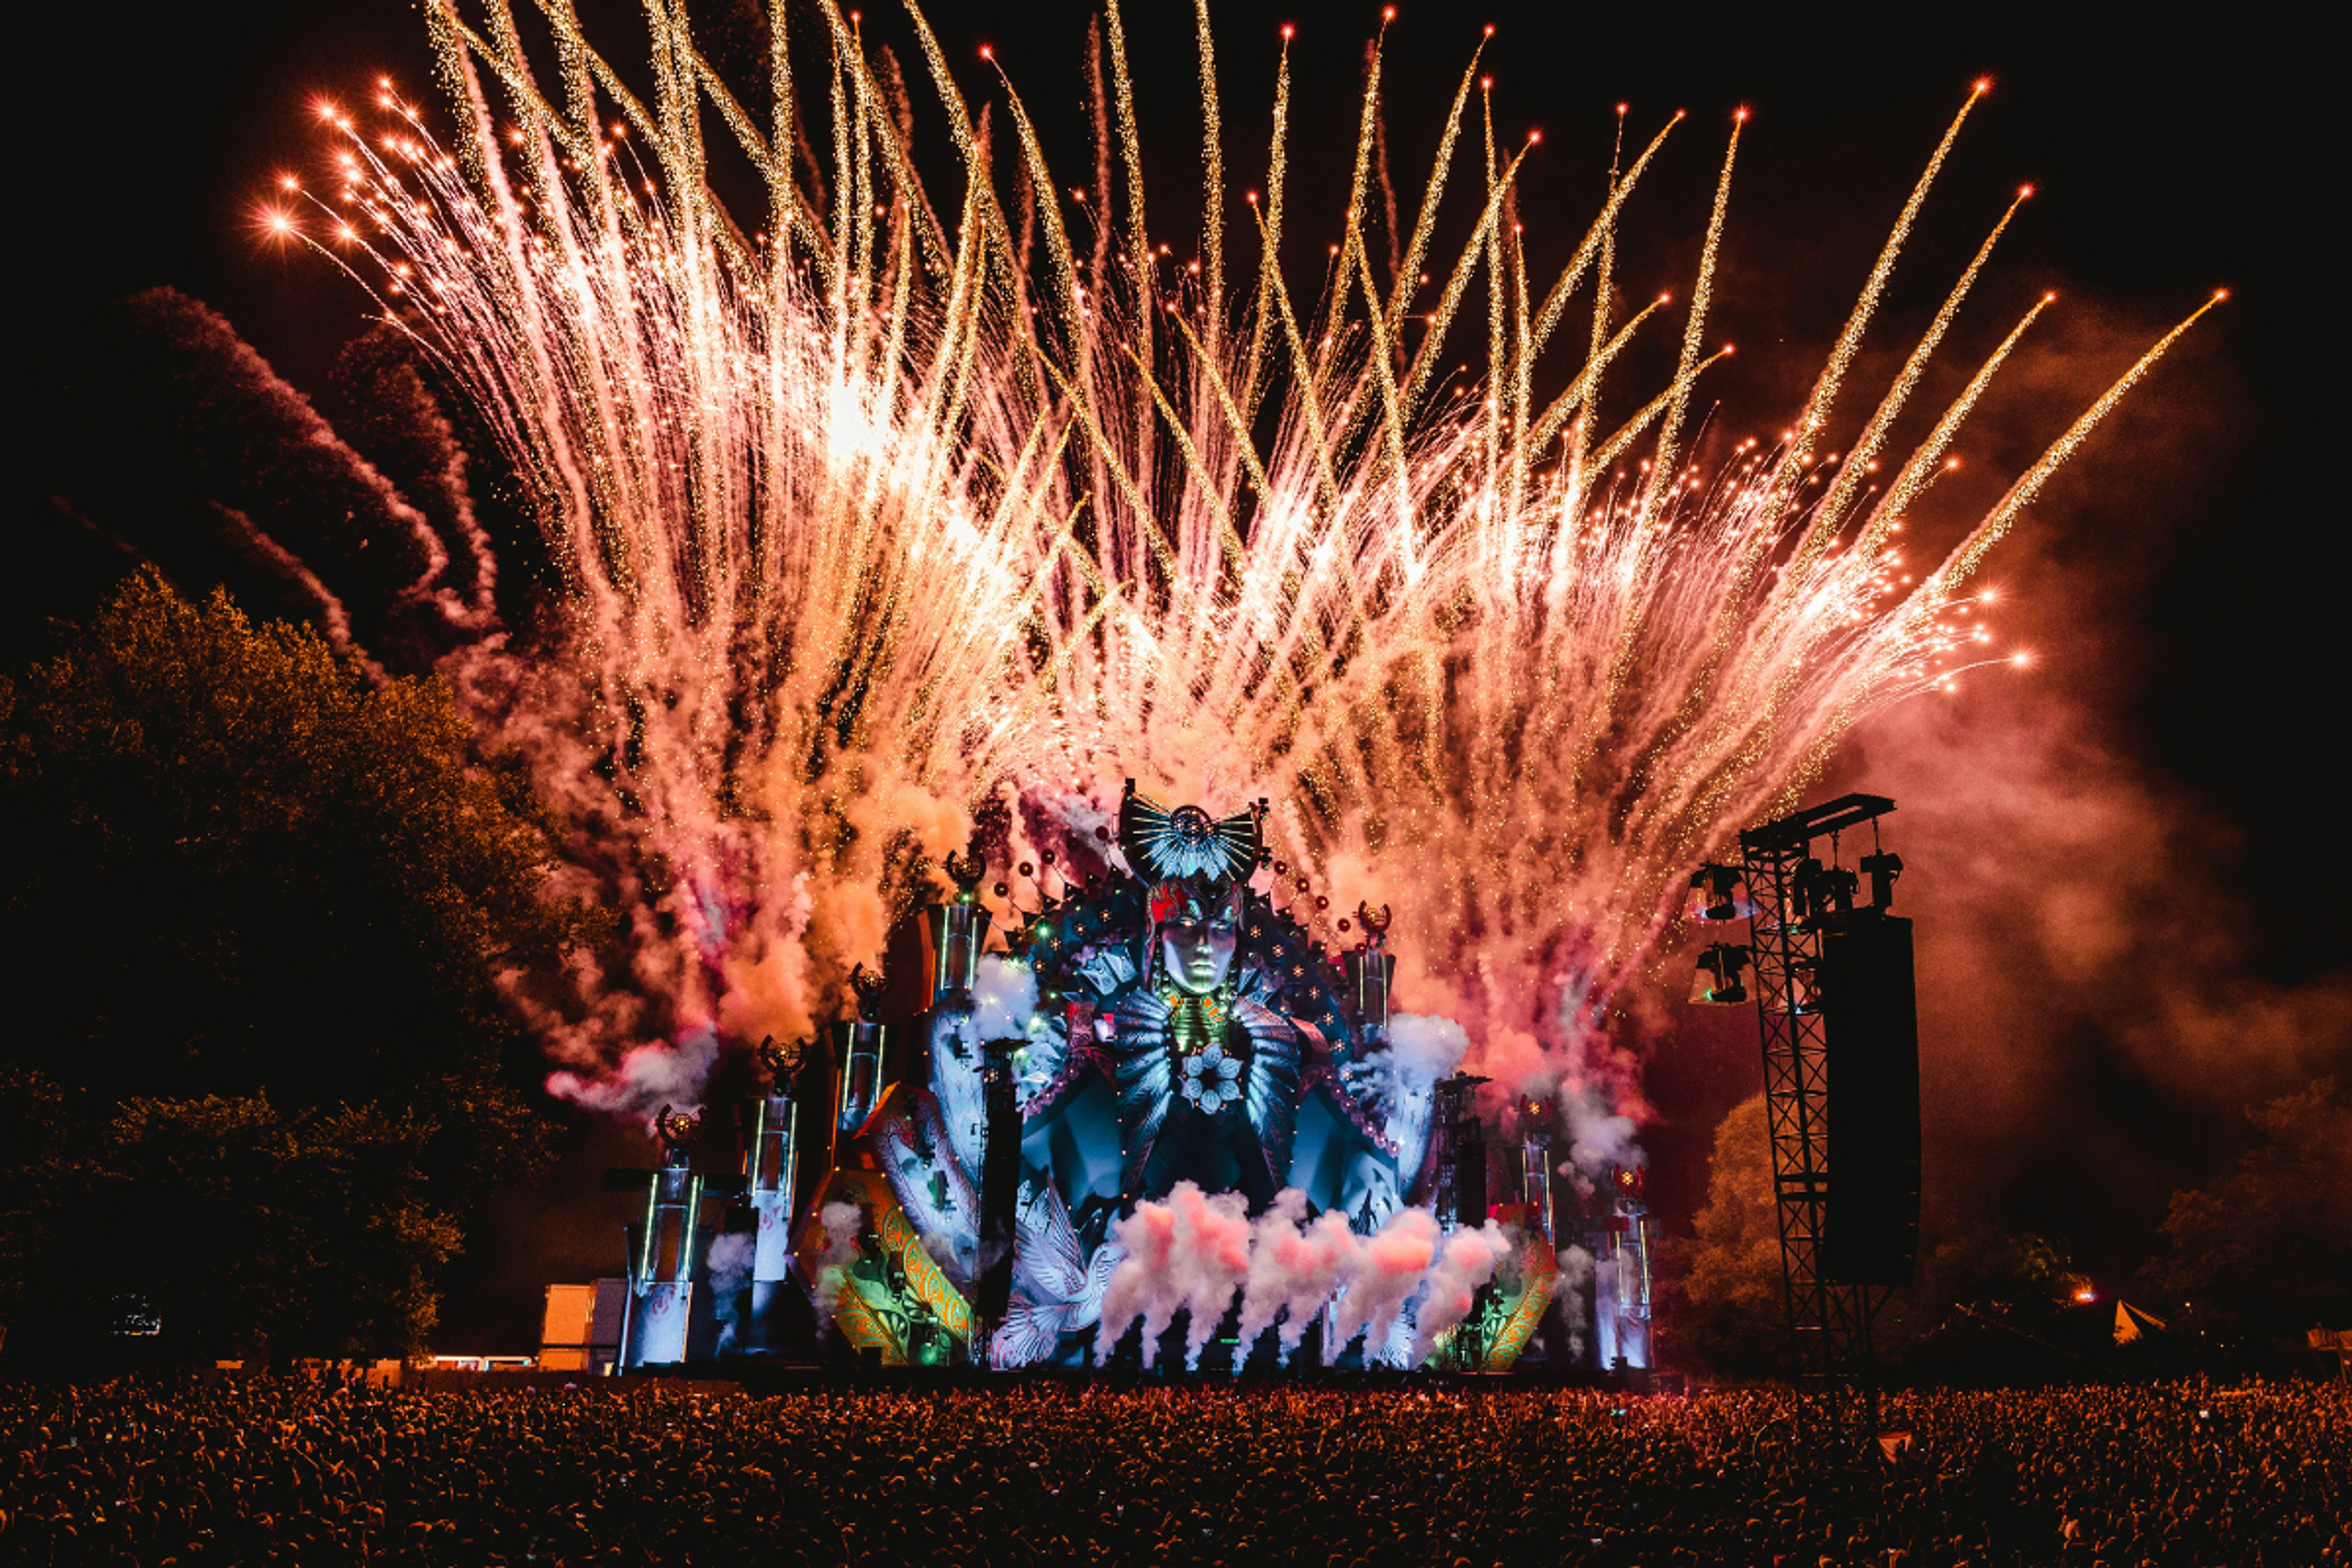 Amazing fireworks during the Mysteryland 2019 festival